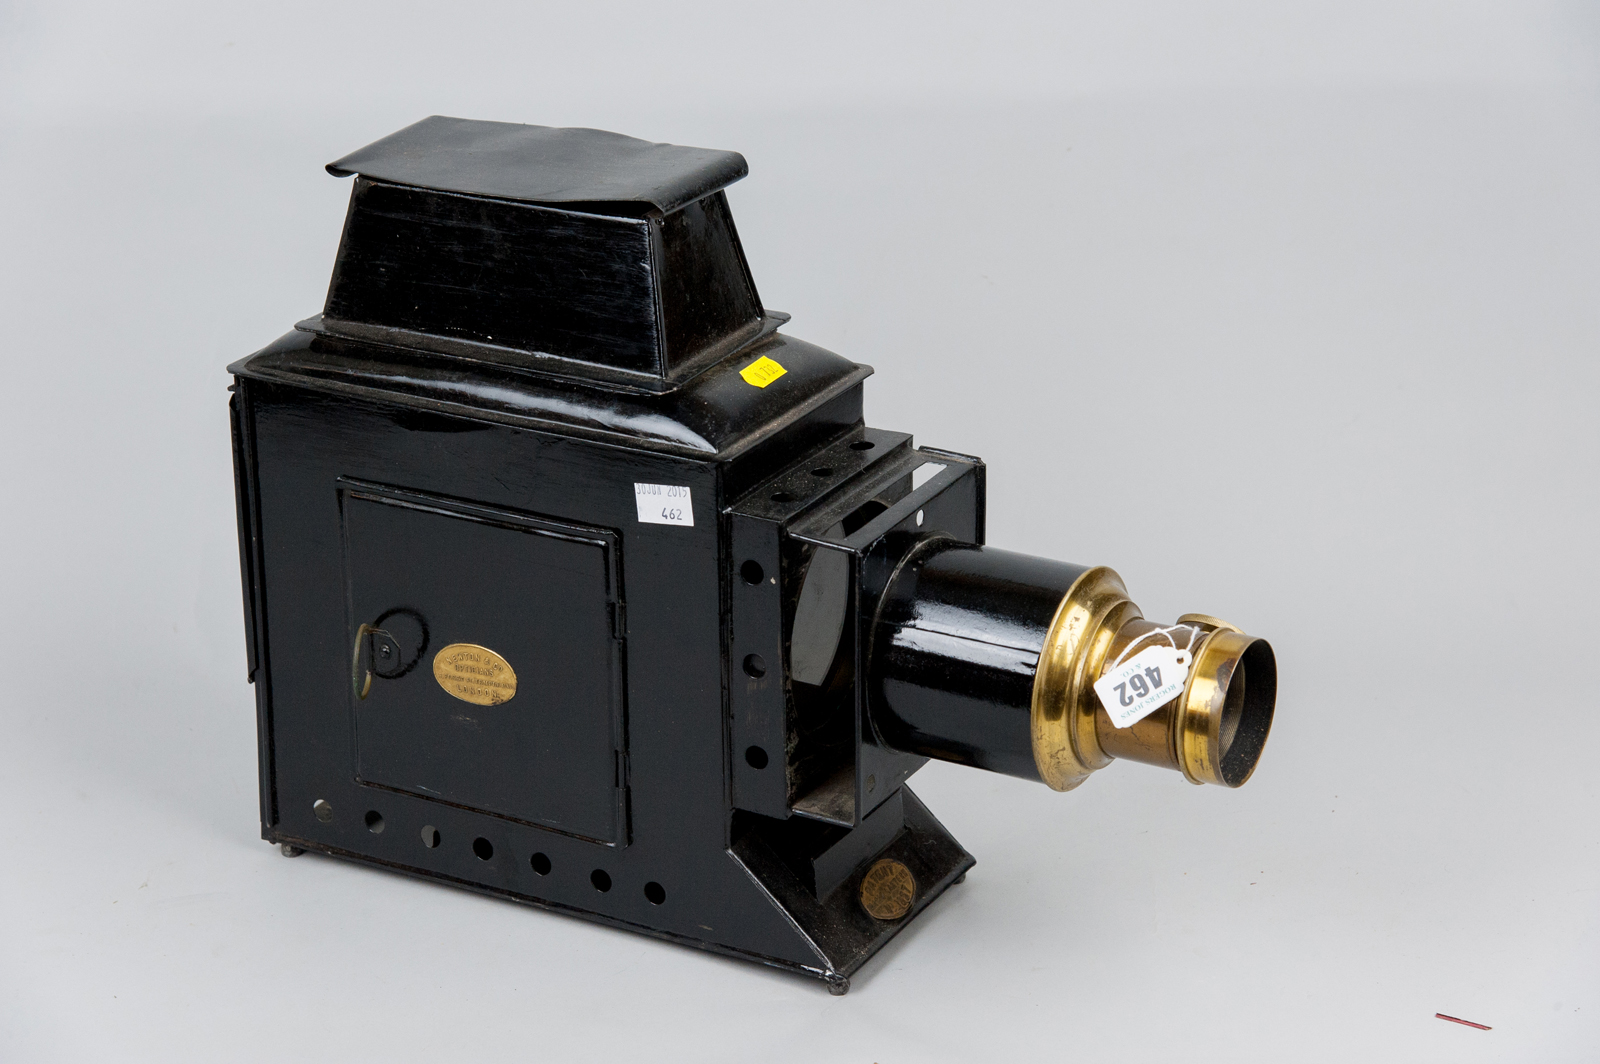 A black japanned Magic Lantern with brass fittings, patent no. 1857 and retailed by Newton & Co